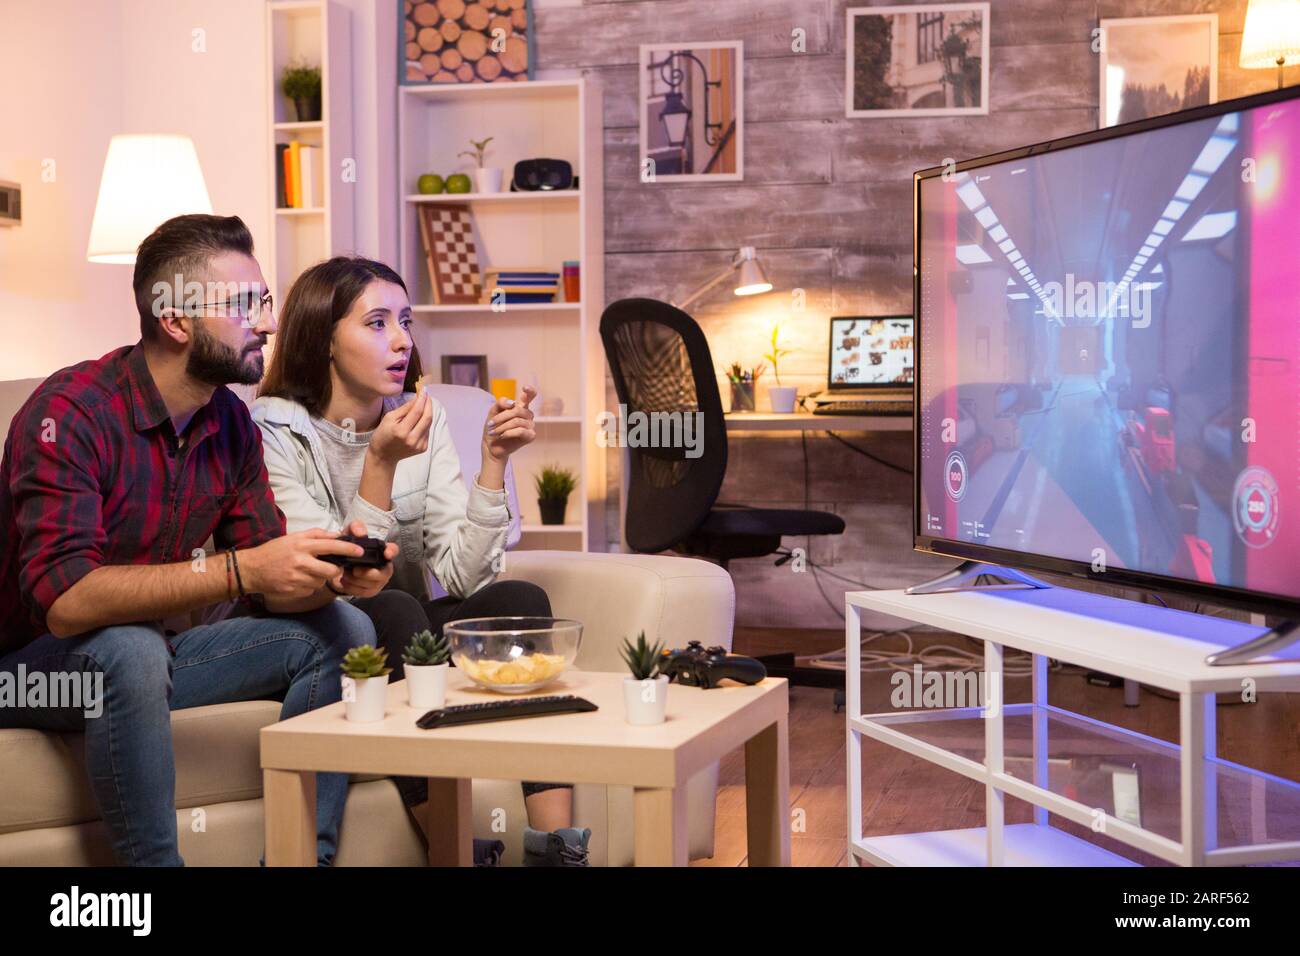 Boyfriend playing video games on television using controller while girlfriend is eating chips. Couple sitting on sofa. Stock Photo